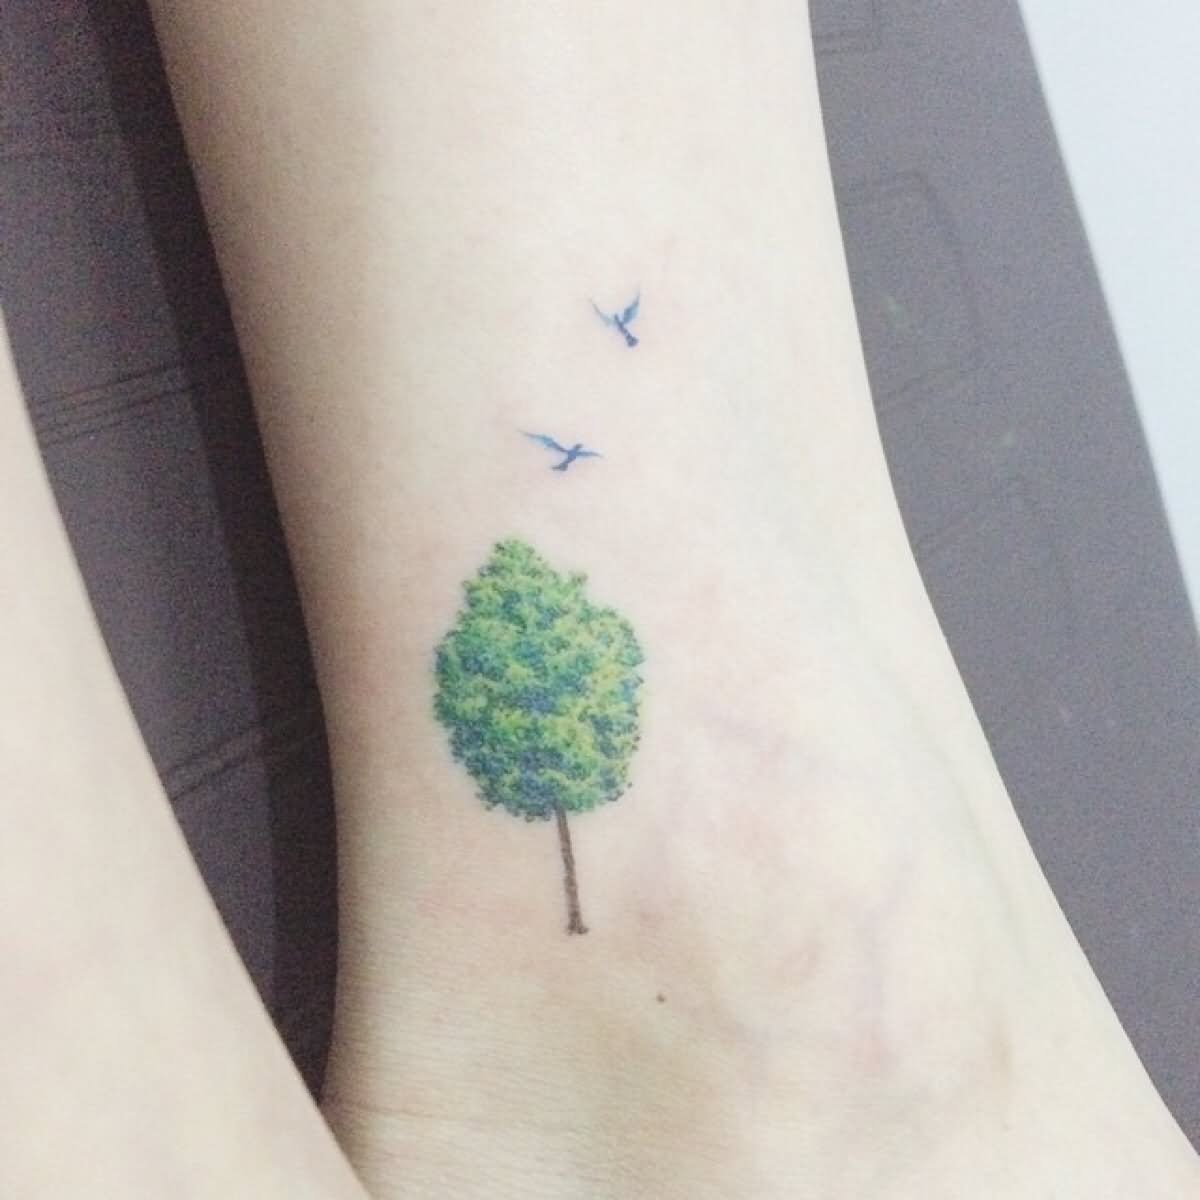 Classic Tree With Flying Birds Tattoo On Inner Ankle